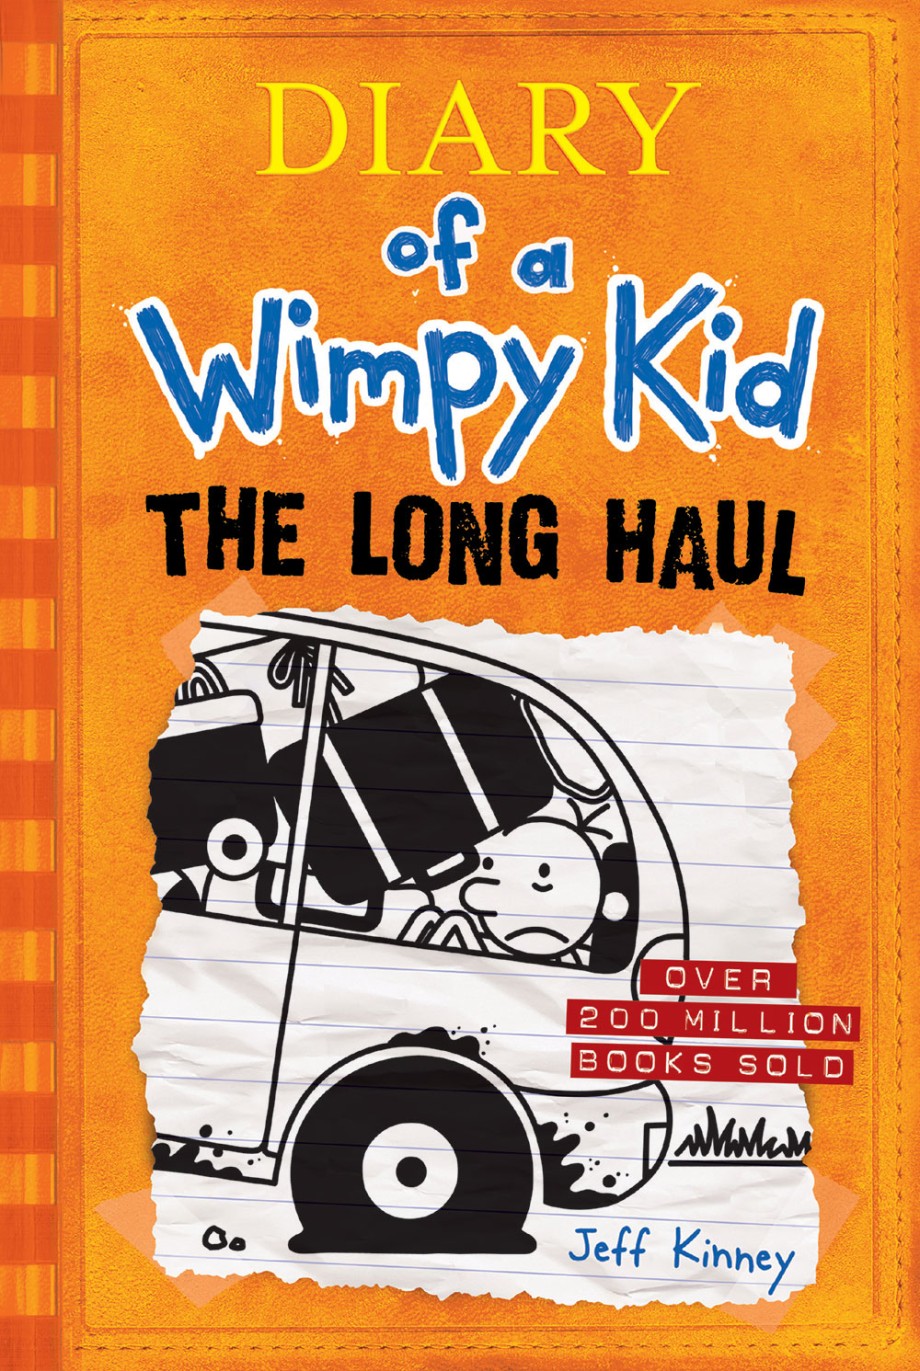 Long Haul (Diary of a Wimpy Kid #9) 